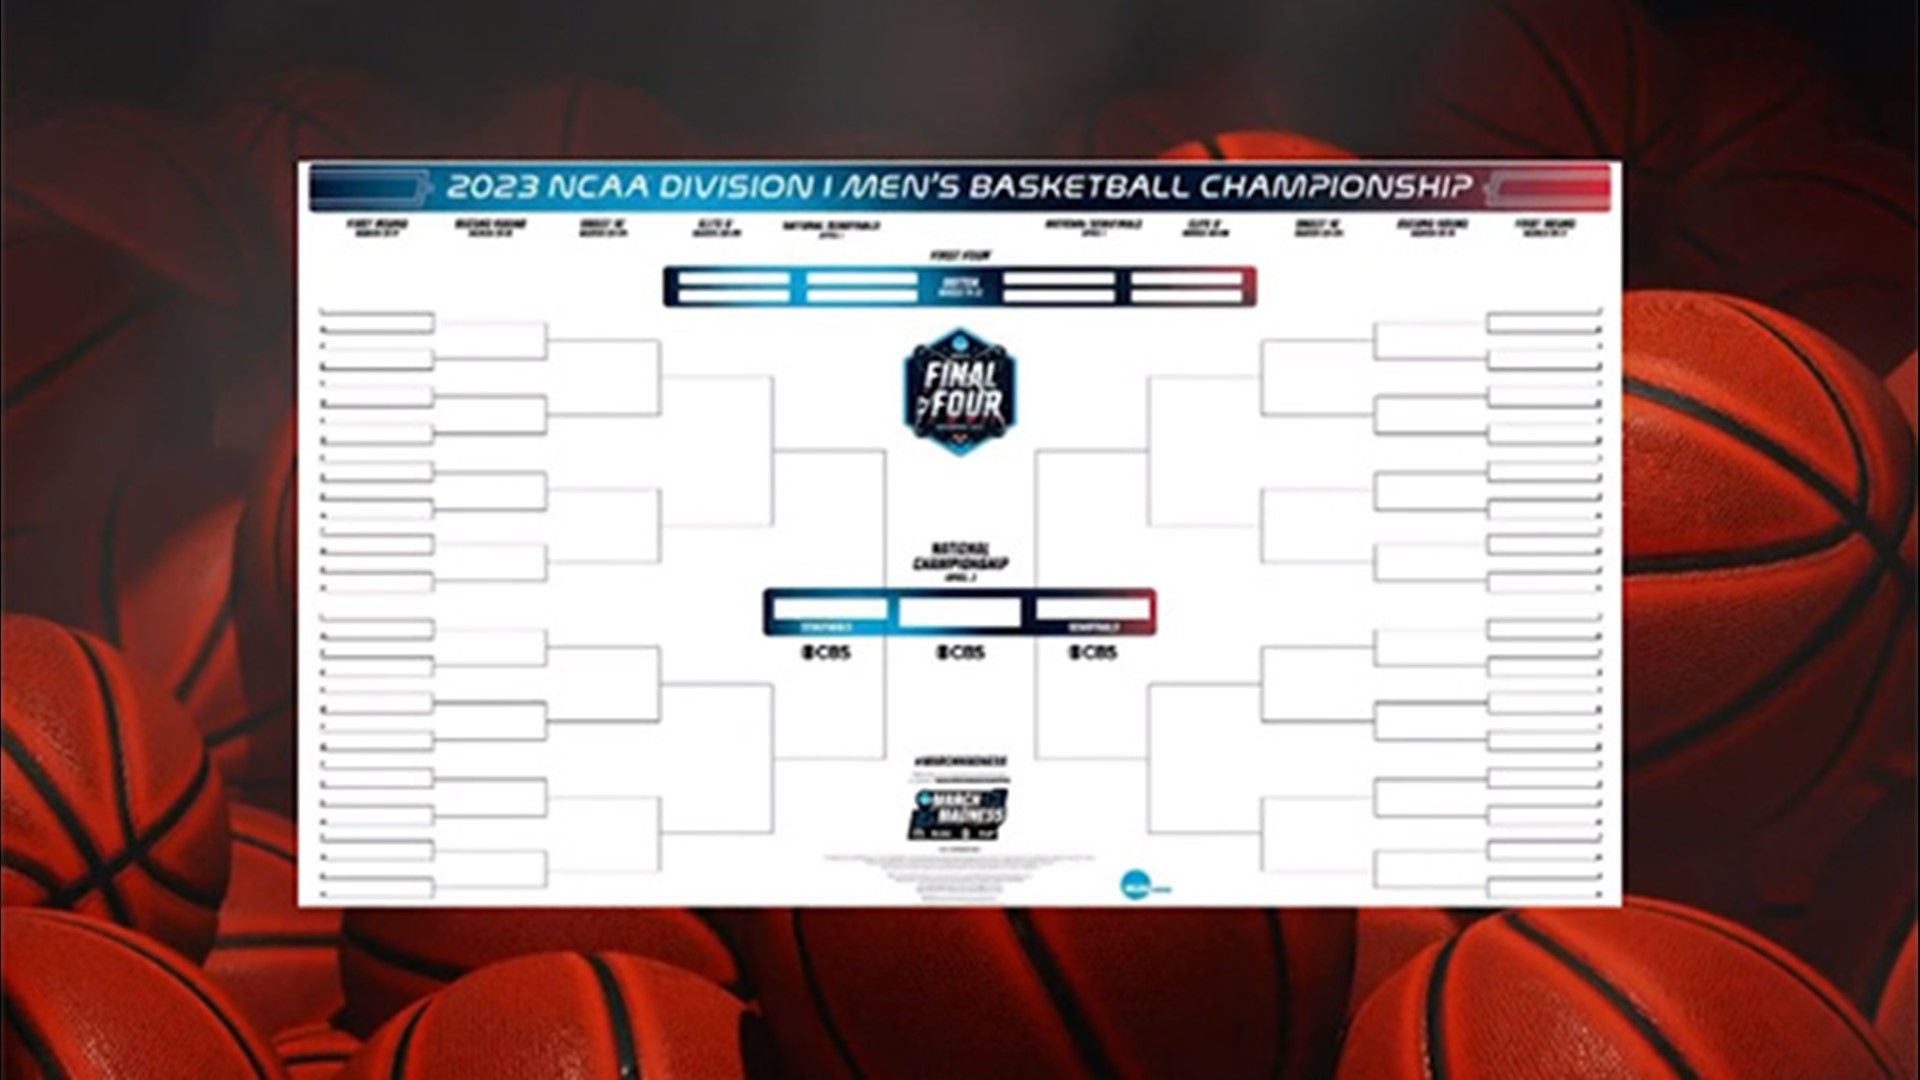 The deadline to have yours filled out is March 16 for the men’s tournament and March 17 for the women’s. Predicting that perfect bracket? That’s highly unlikely.